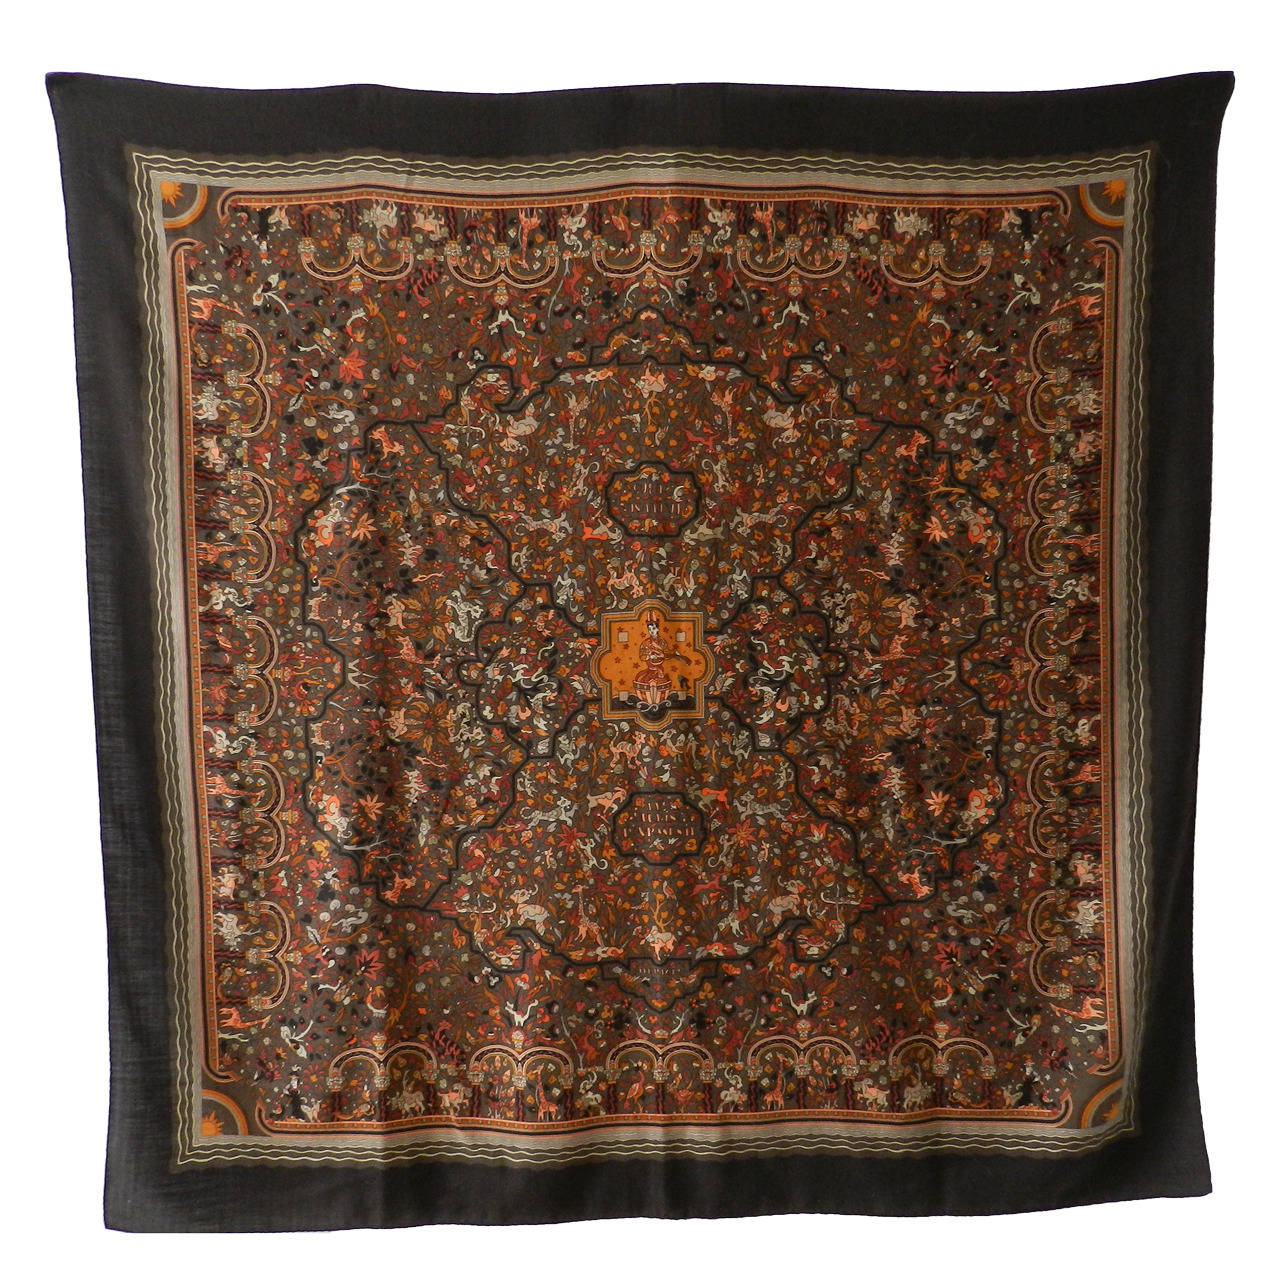 Hermes Large Brown Cashmere Shawl Scarf 52"